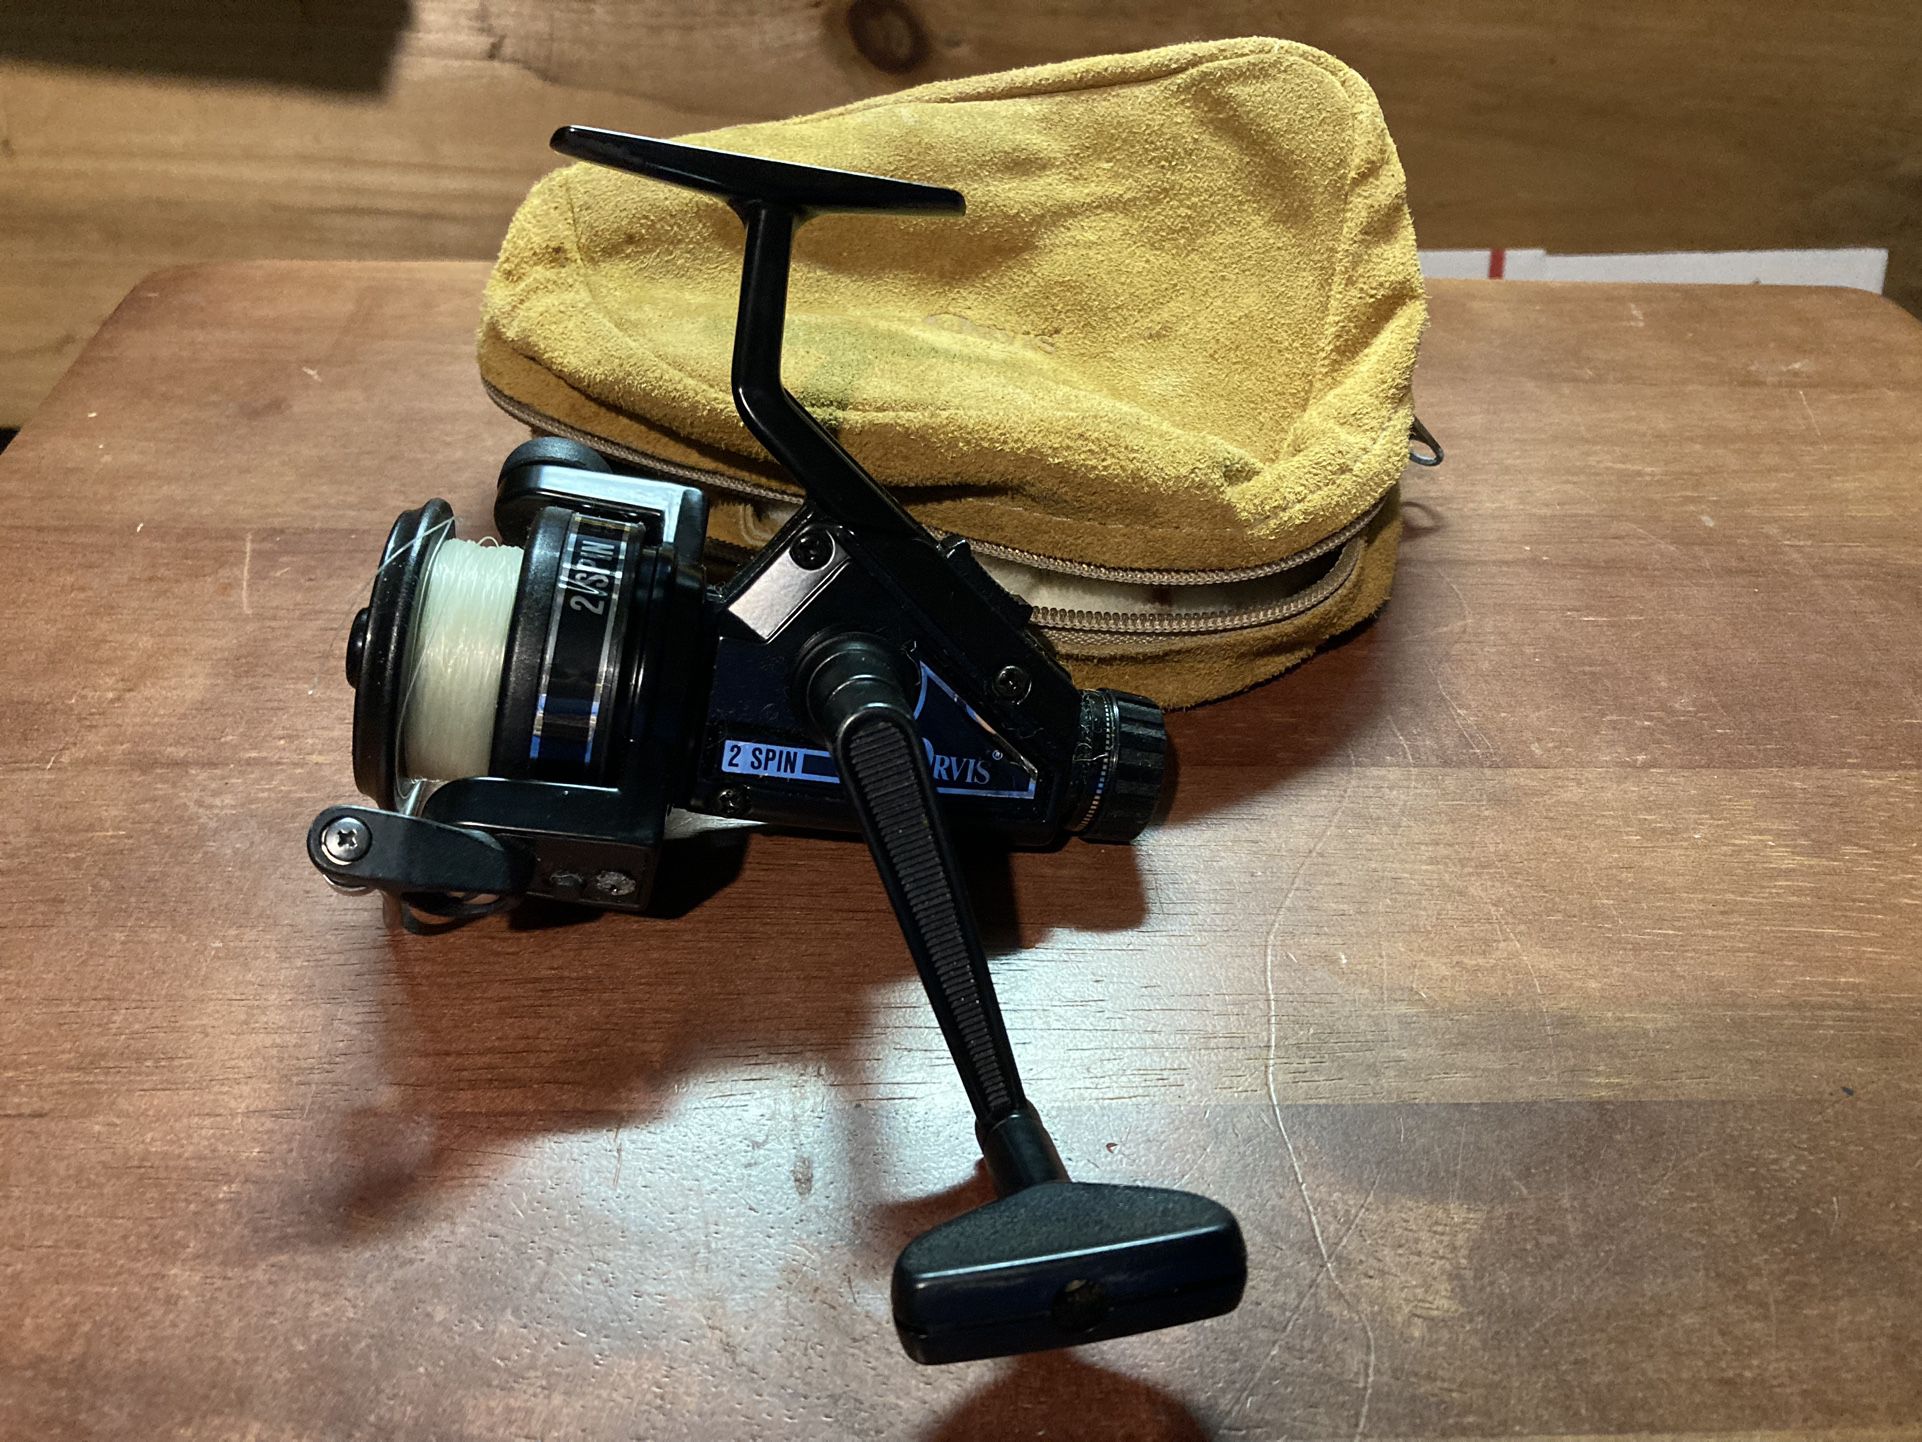 Orvis 2 Spin Fishing Reel with Case